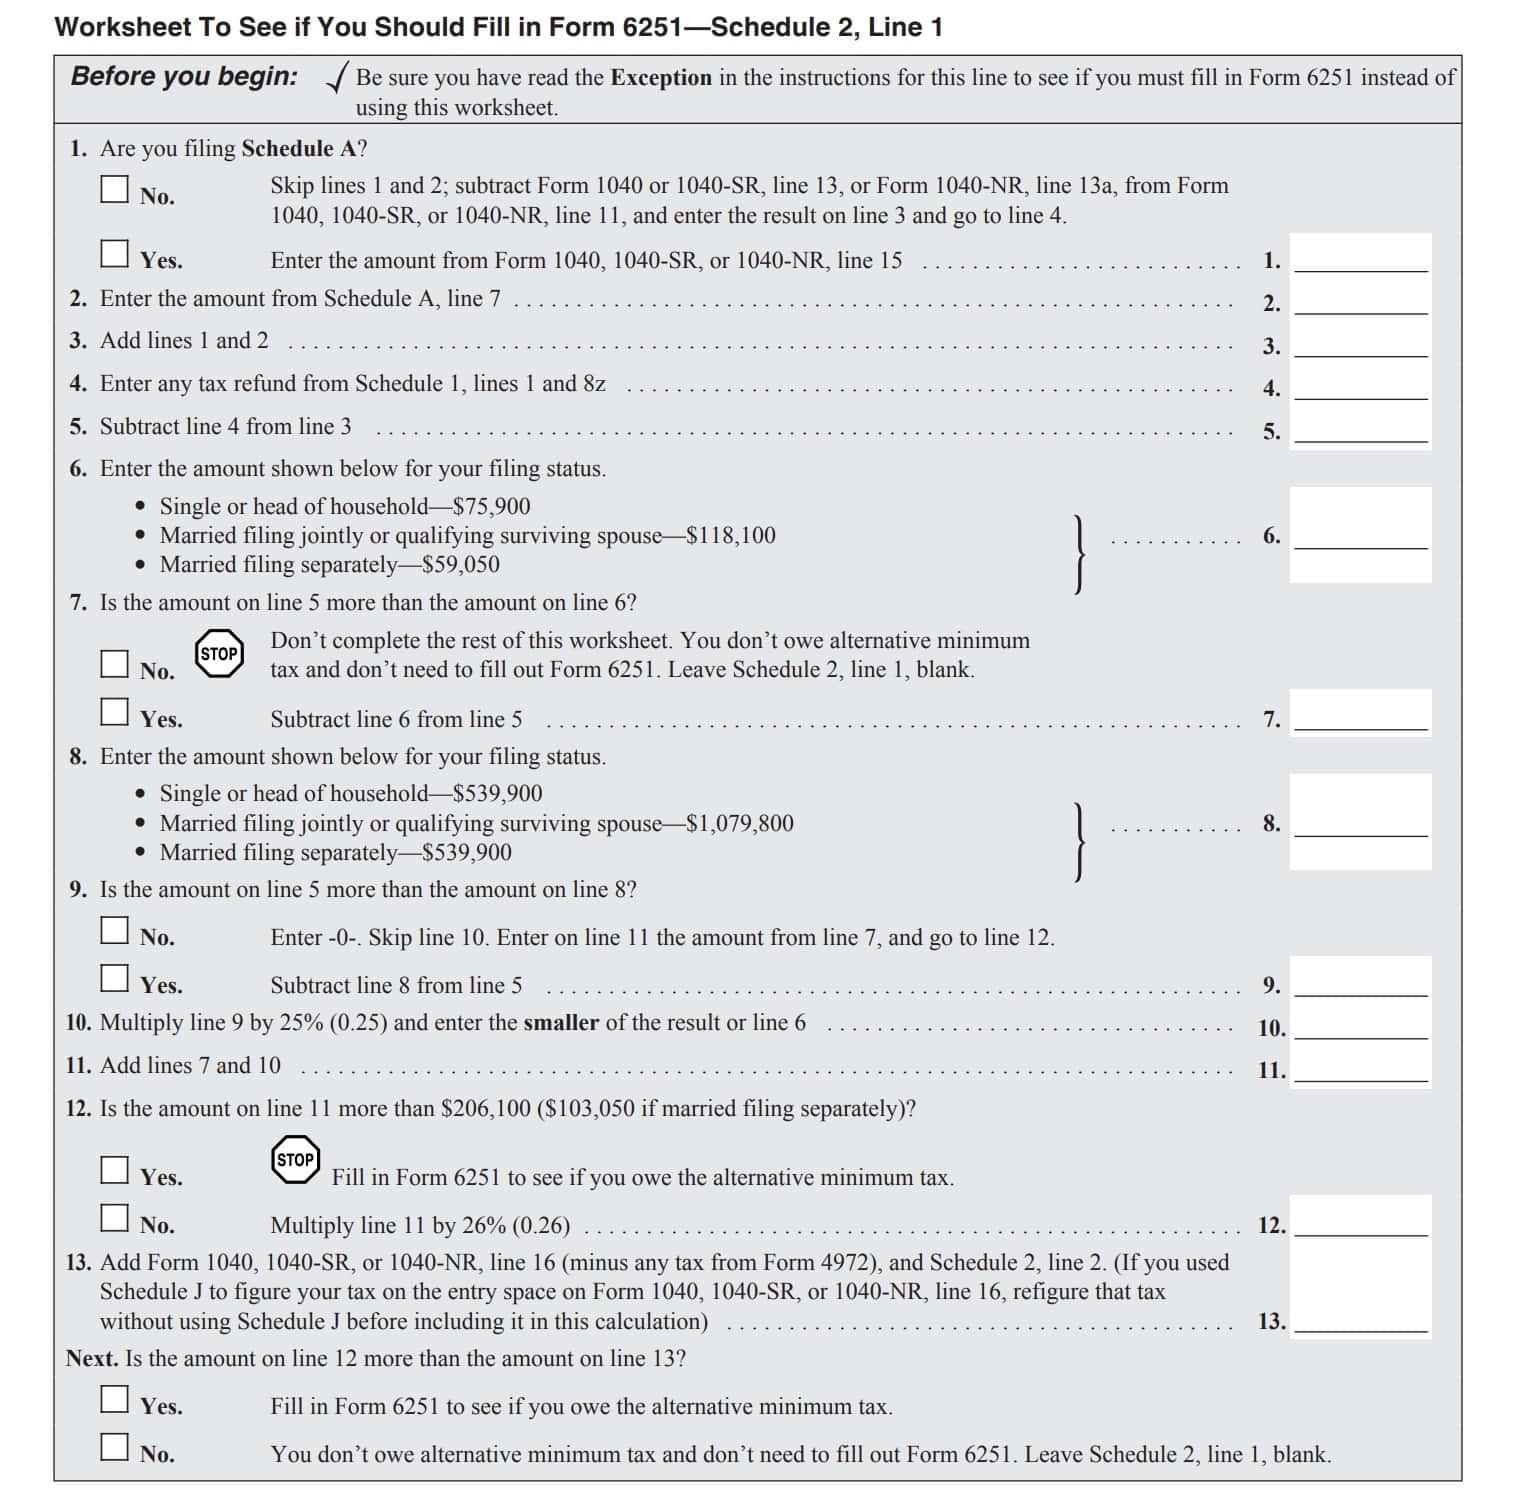 worksheet to see if you should fill in IRS Form 6251